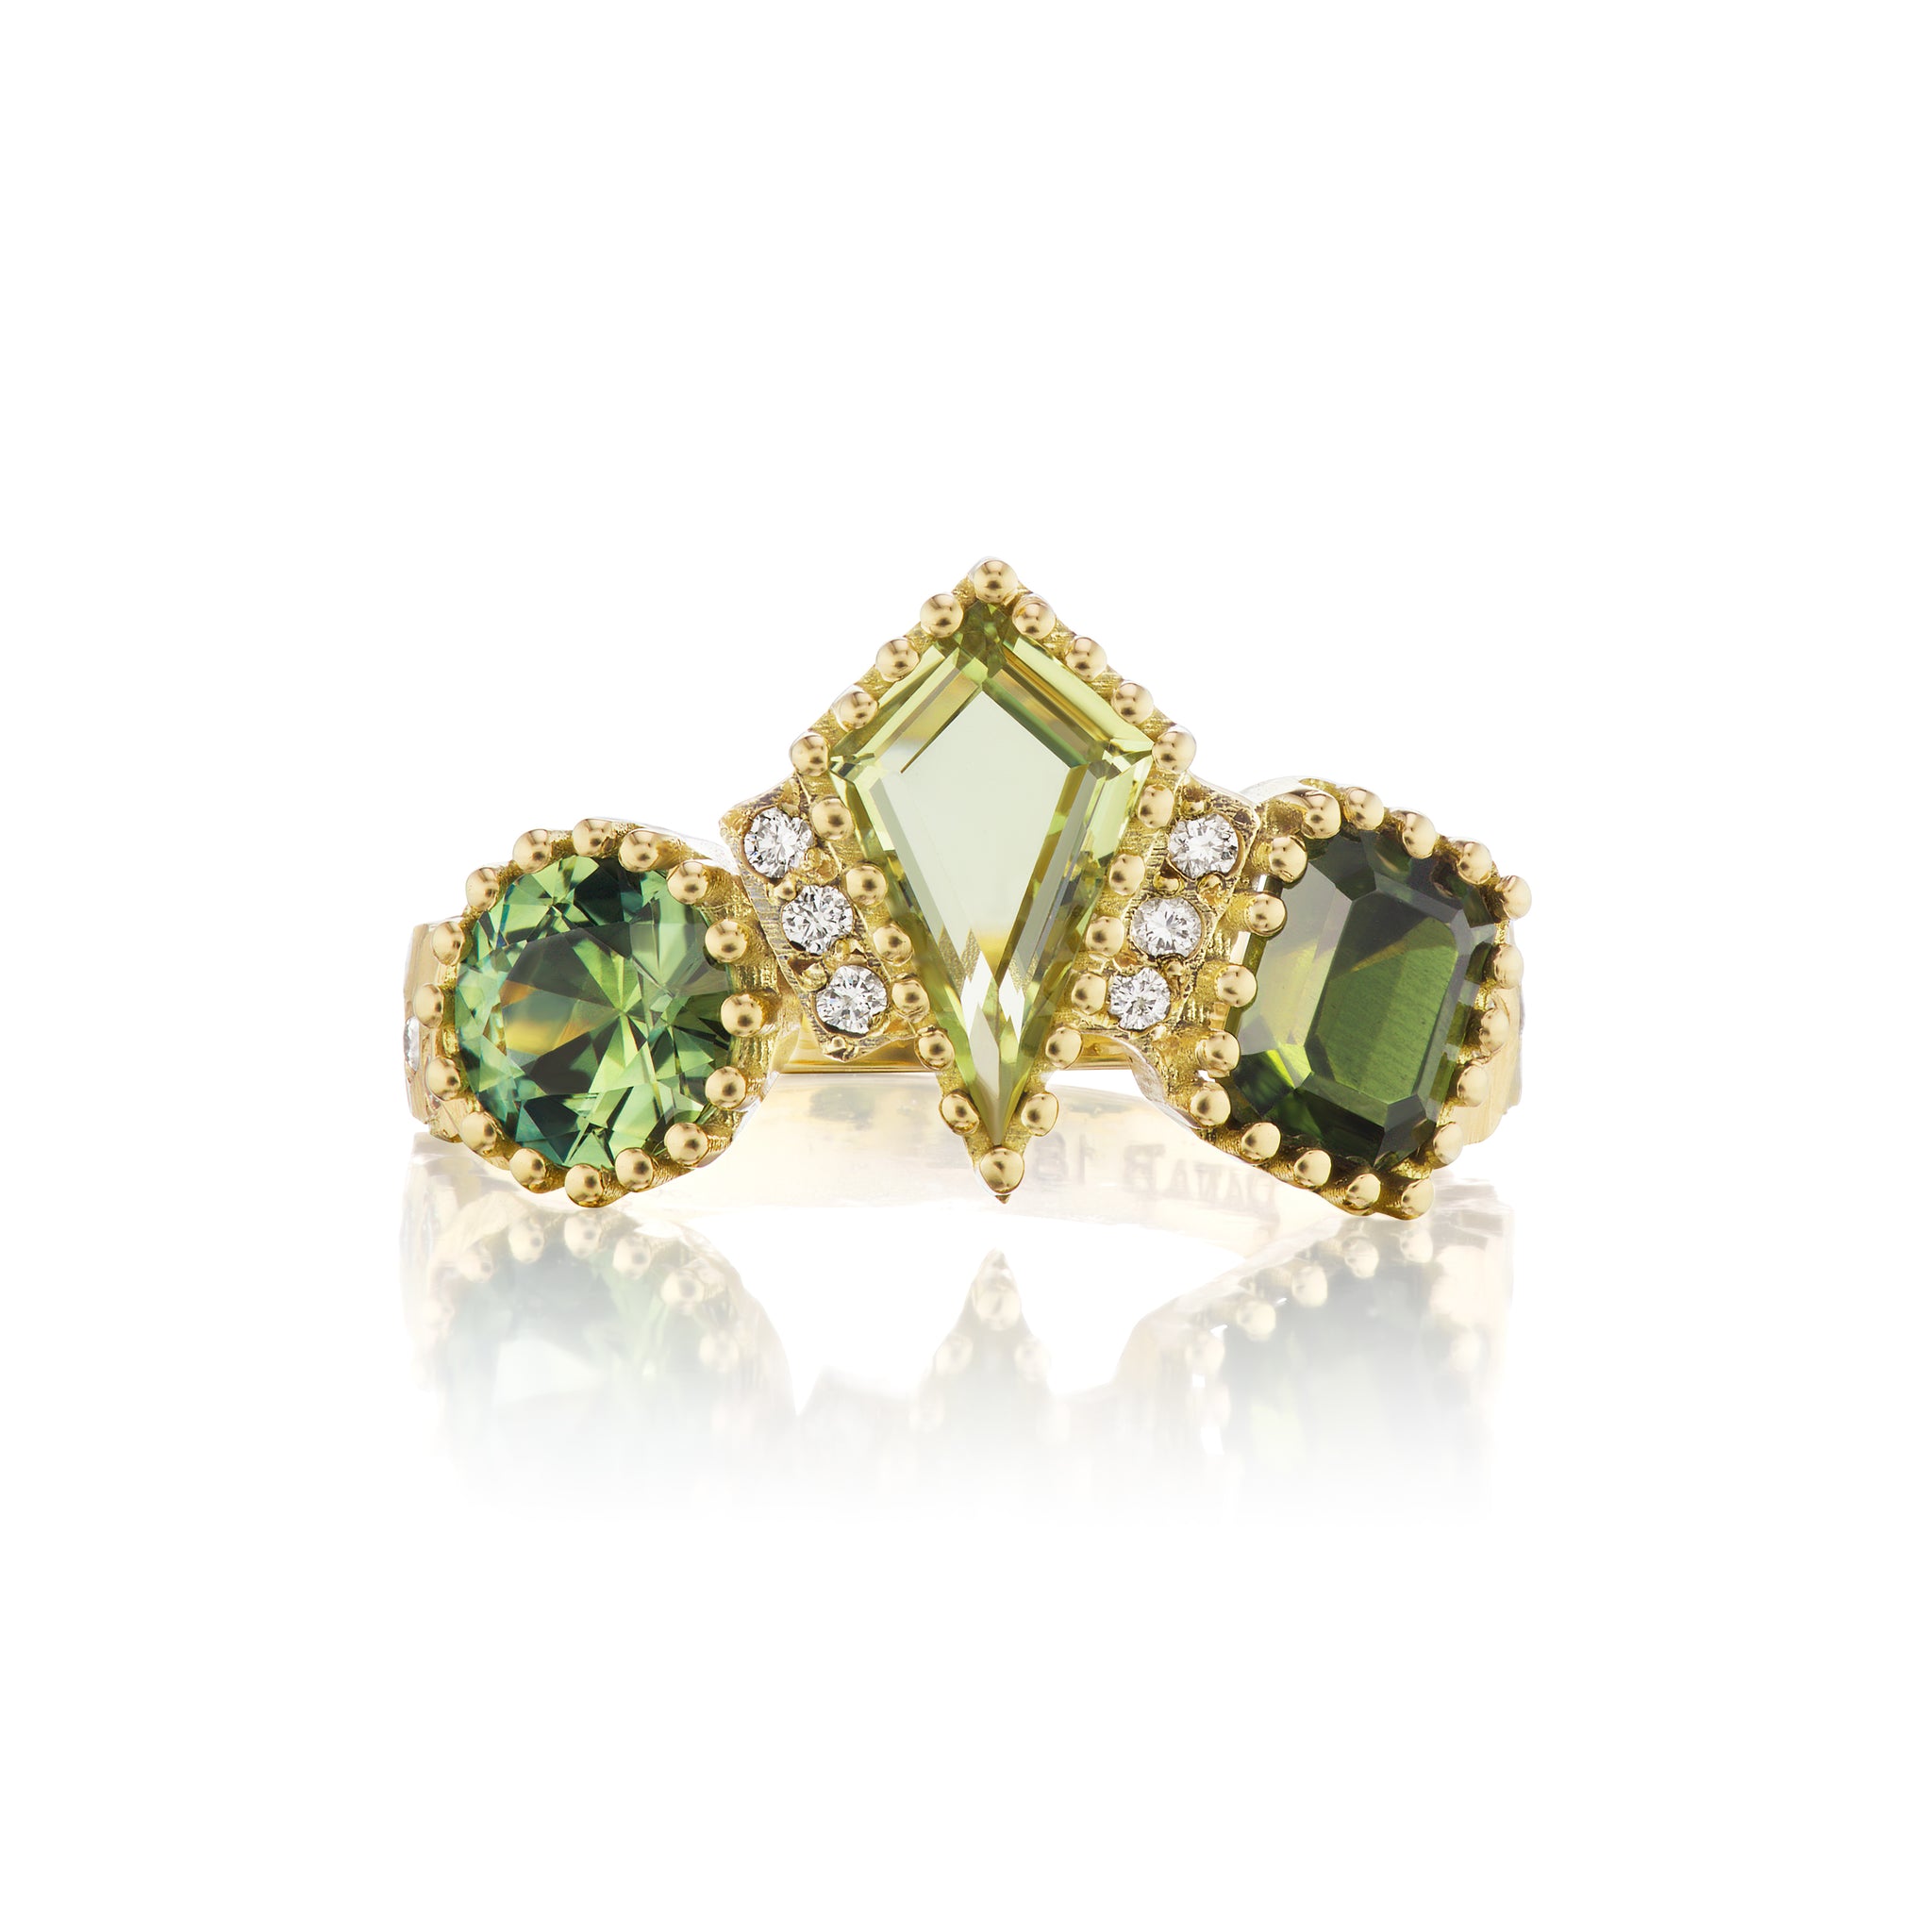 Three Fancy Greens Ring with Montana and Australian Sapphires